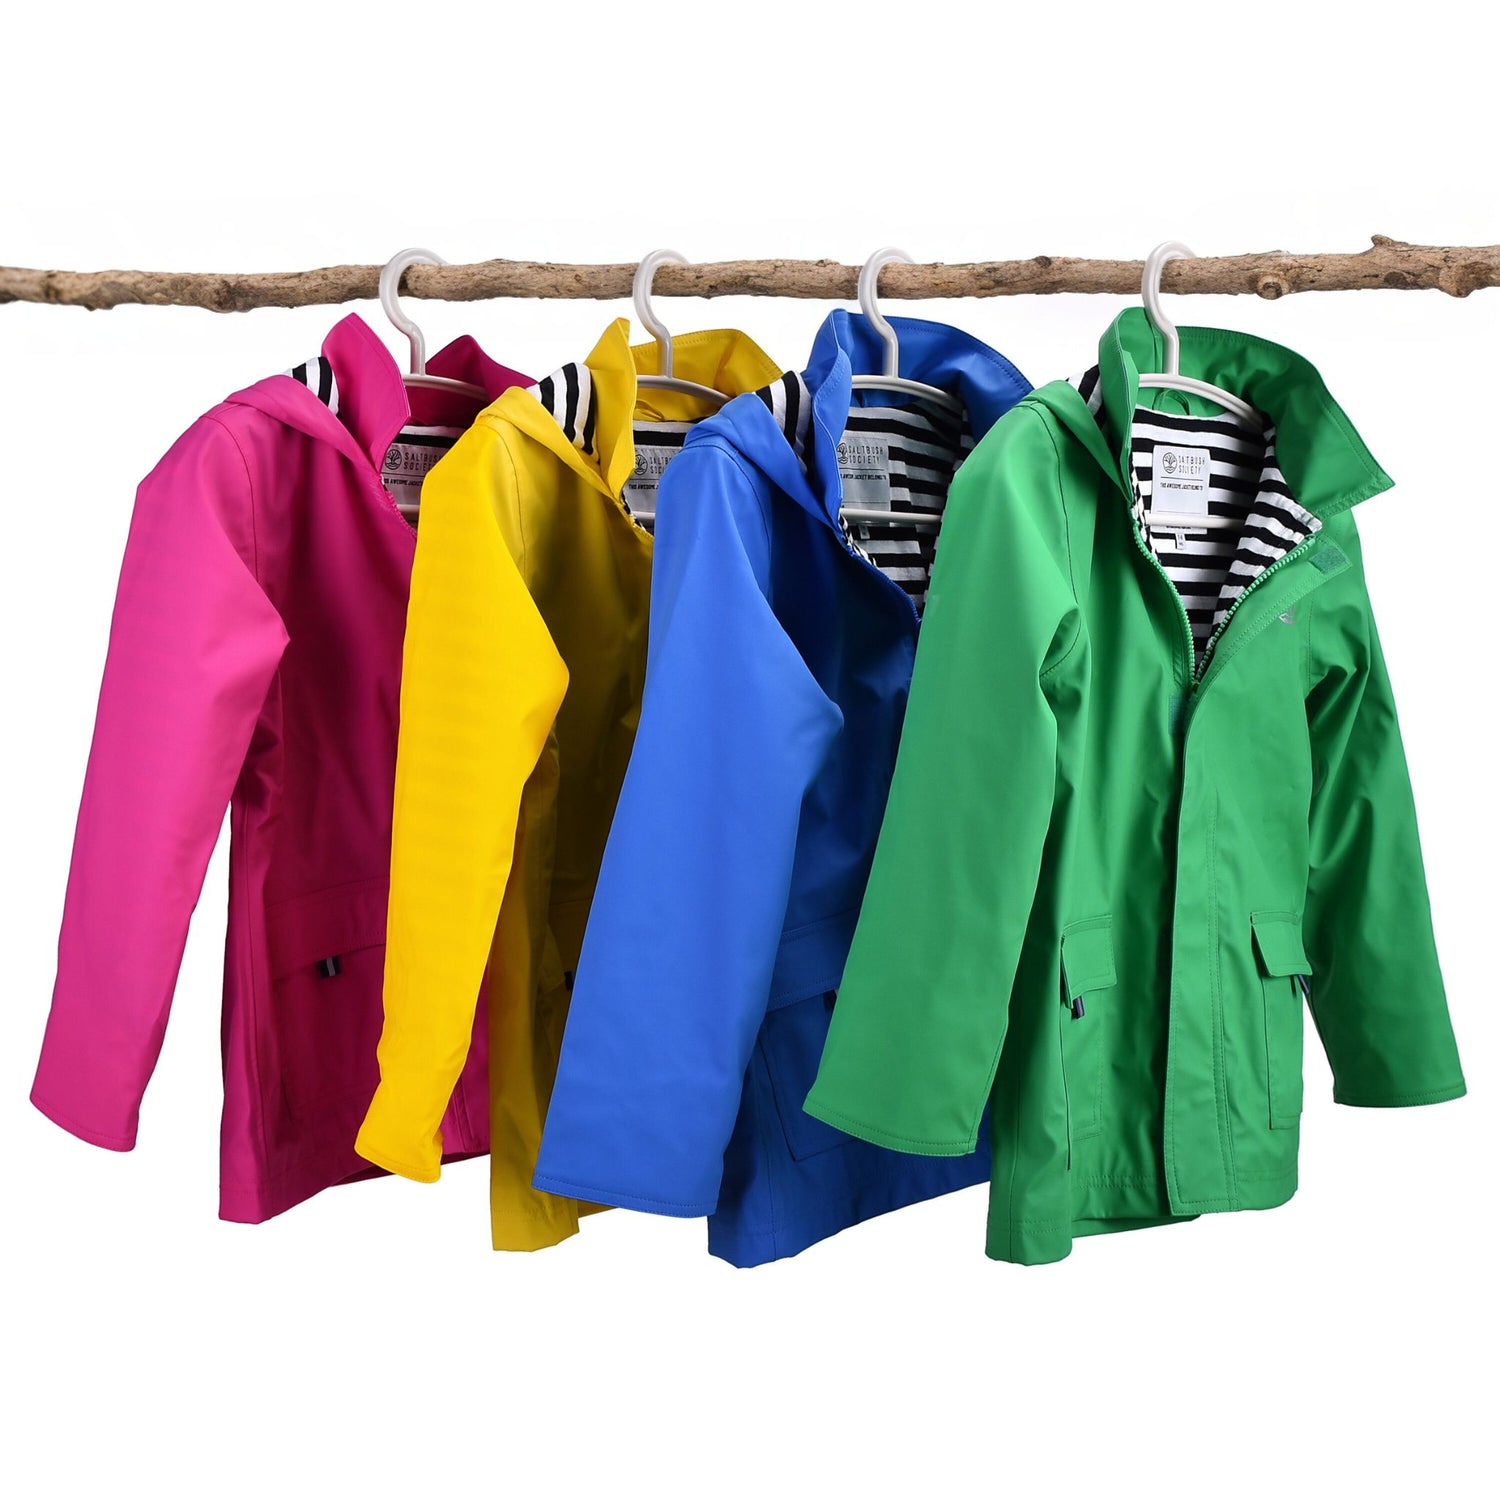 Classic Raincoats designed for kids. Four Raincoats hanging up on a tree branch in pink, yellow, blue and green